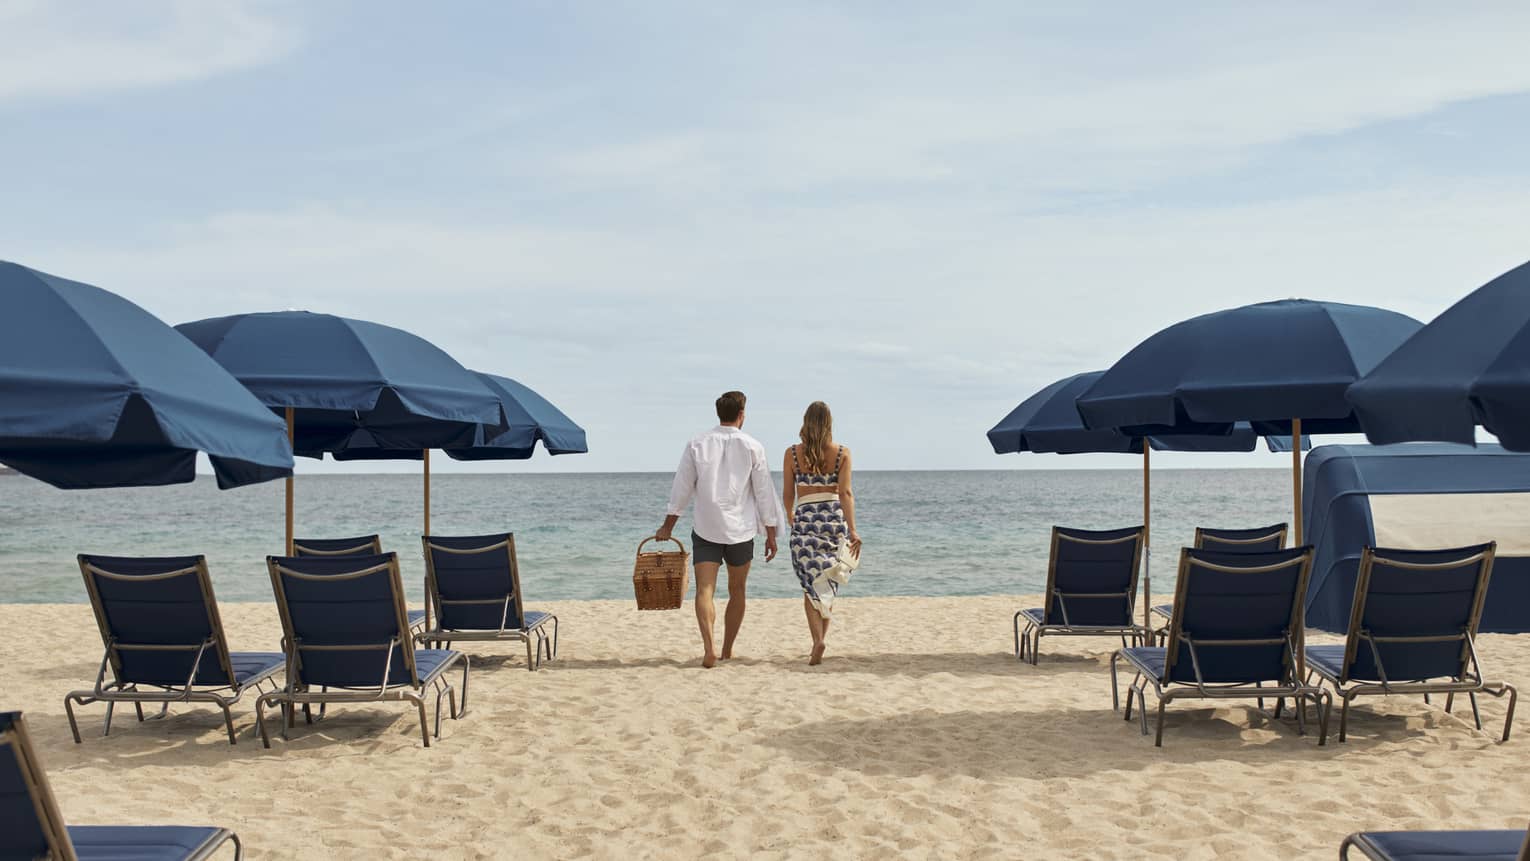 A man and woman walking between blue lounge chairs and umbrellas on sand towards the ocean.